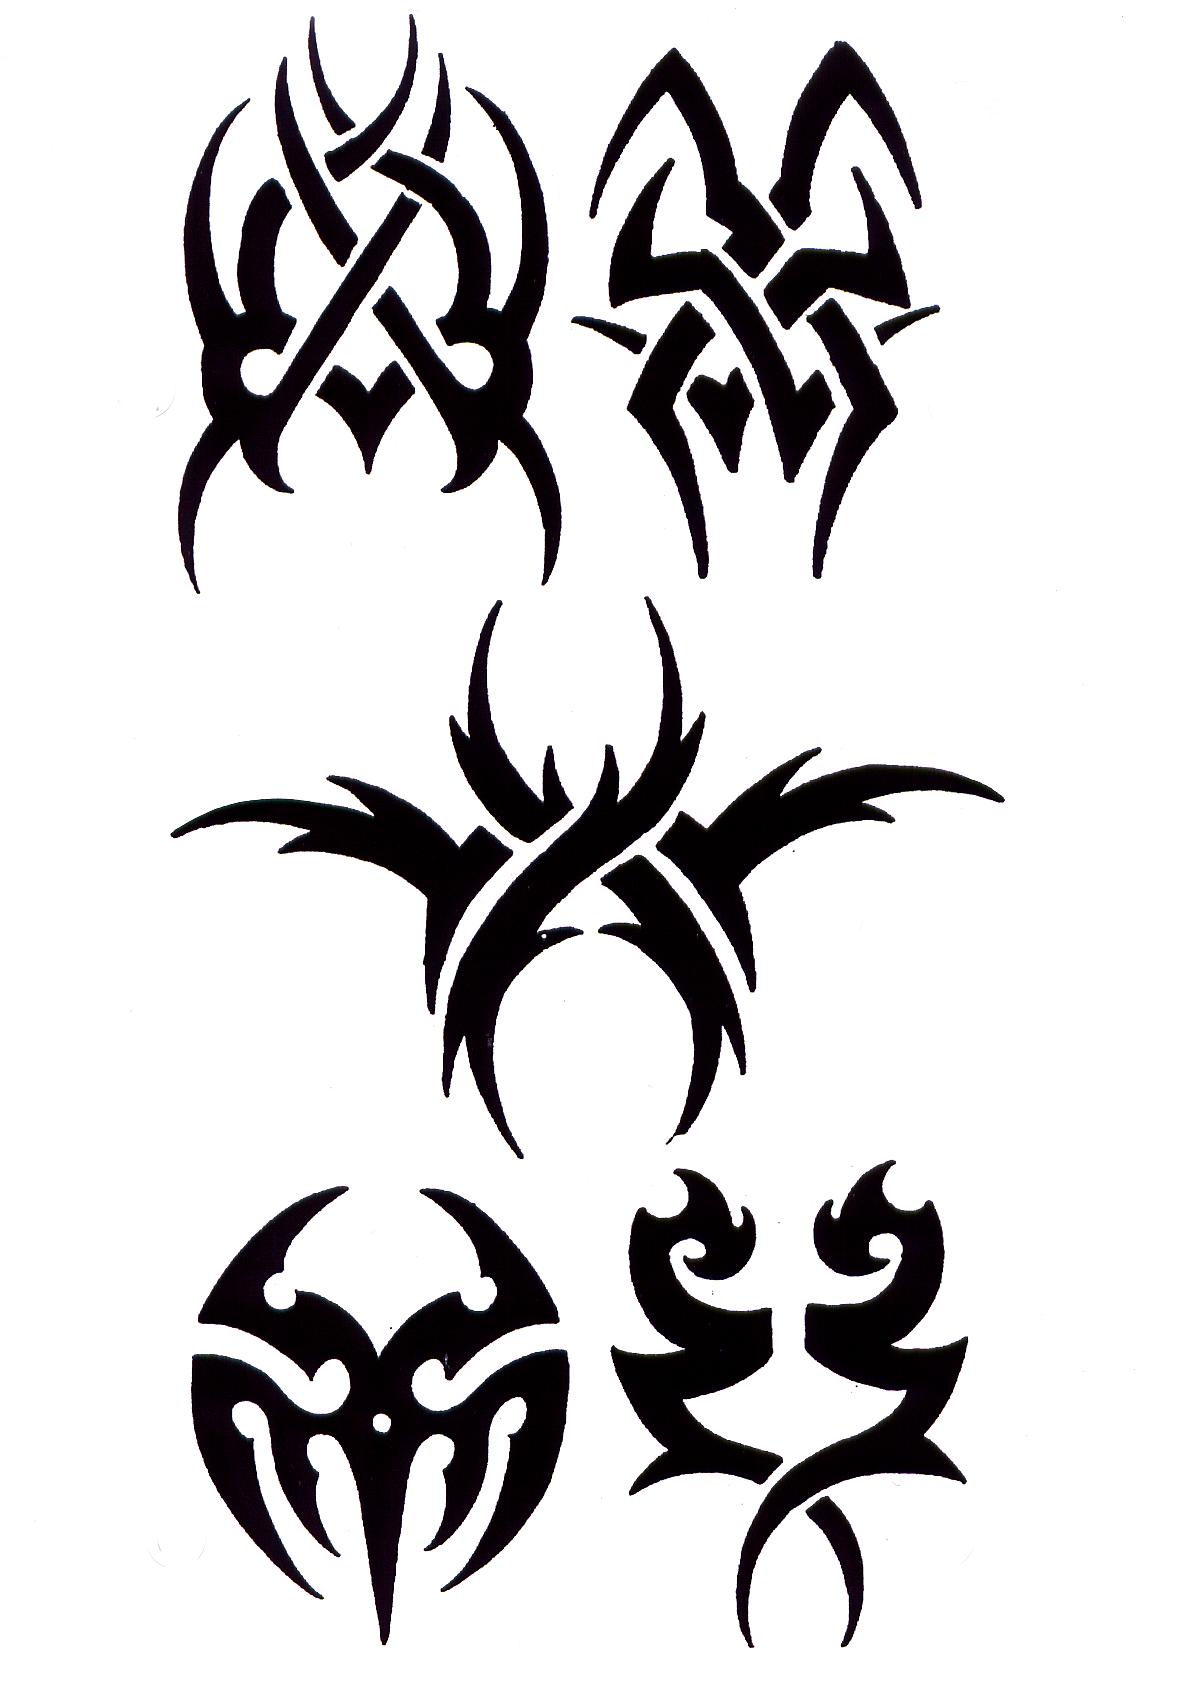 Tribal Skull And Banner Tattoo Designs